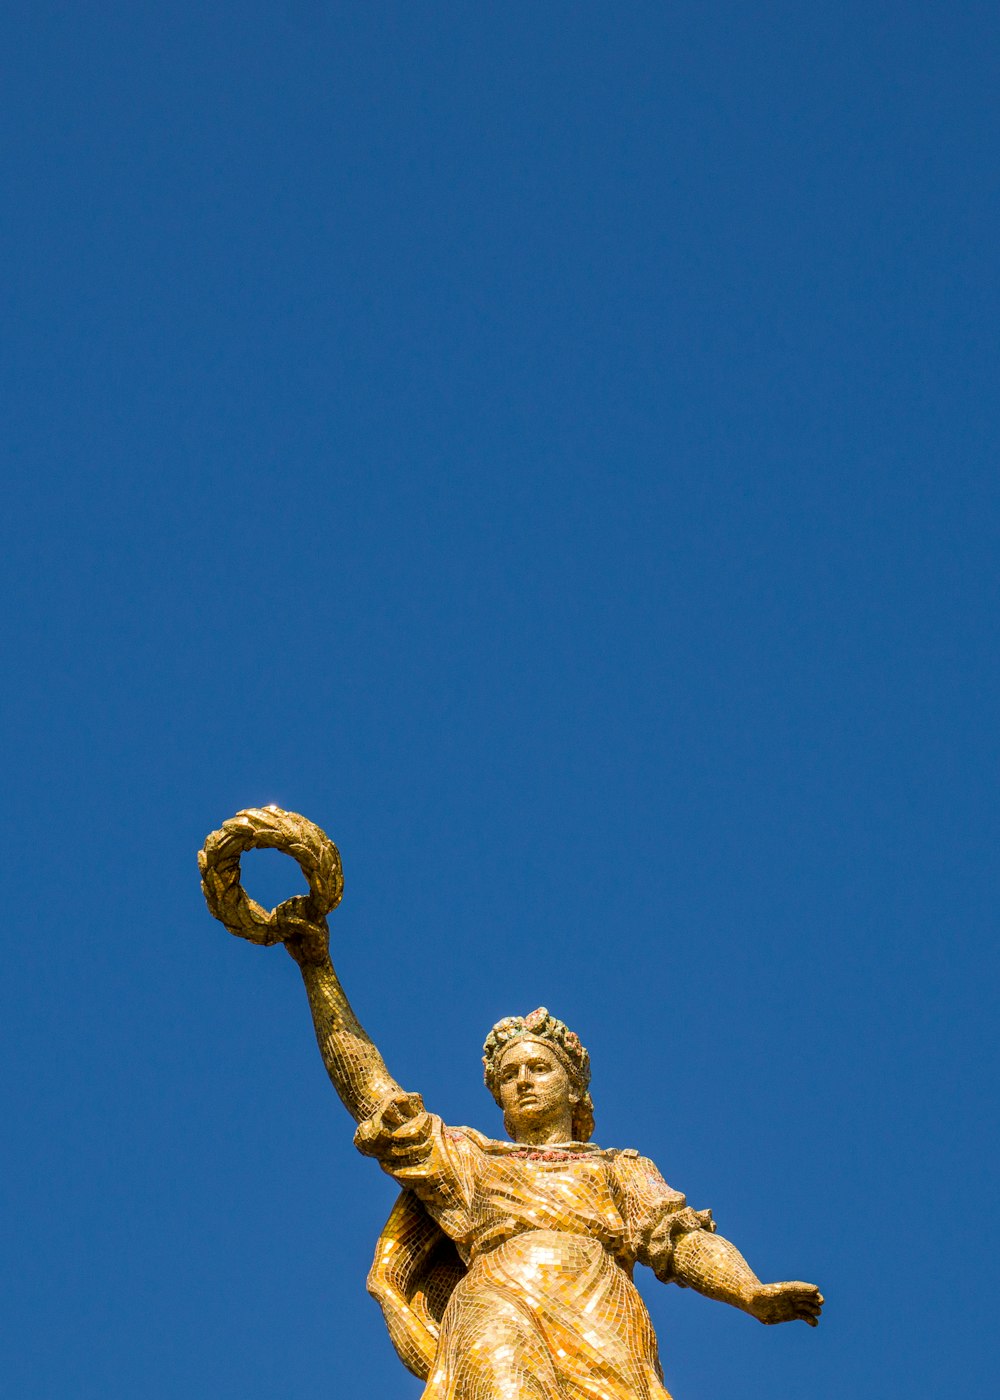 a statue of a woman holding a ring on top of a building